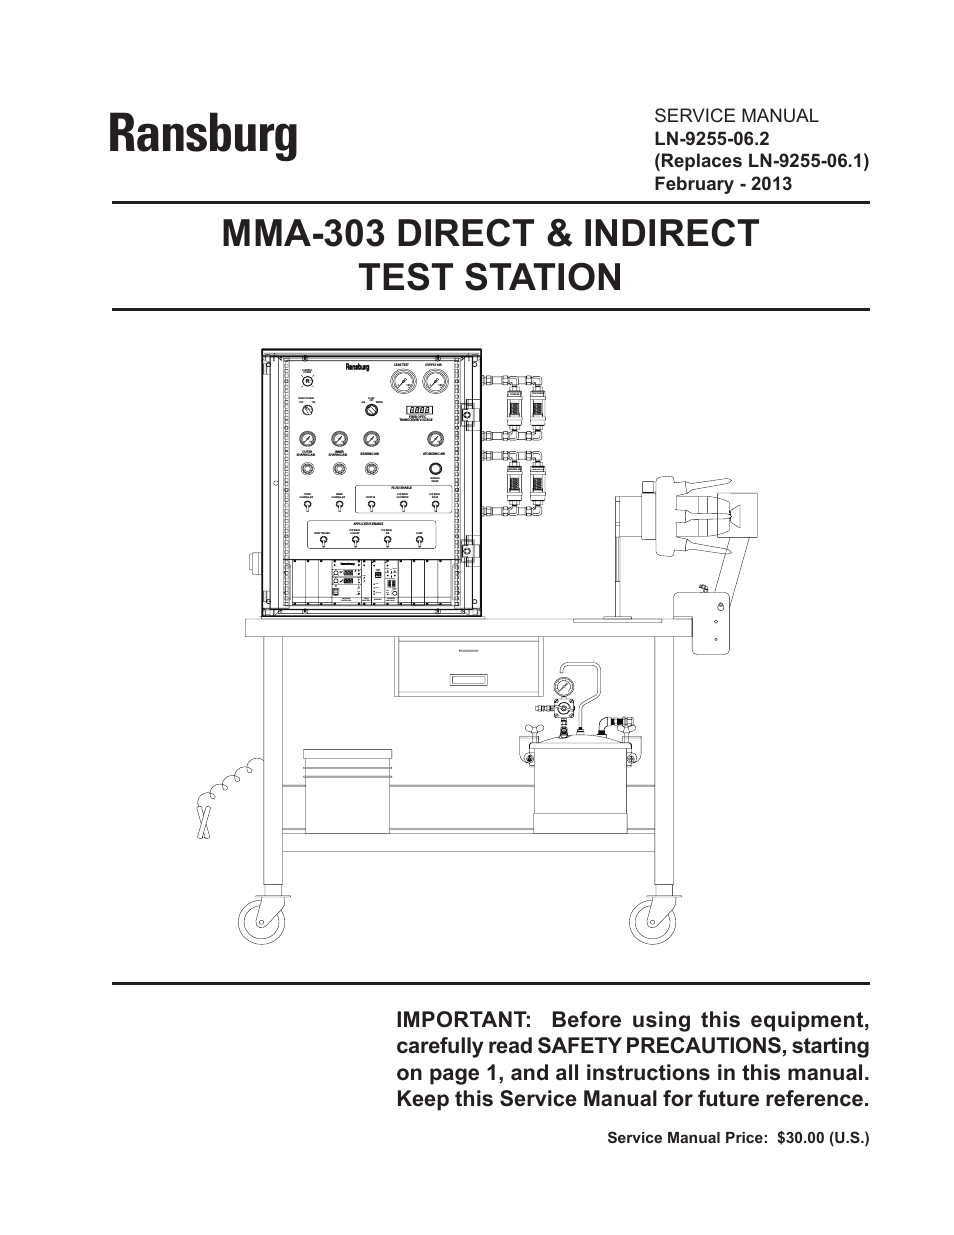 MMA-303 Direct_Ind Test Stand